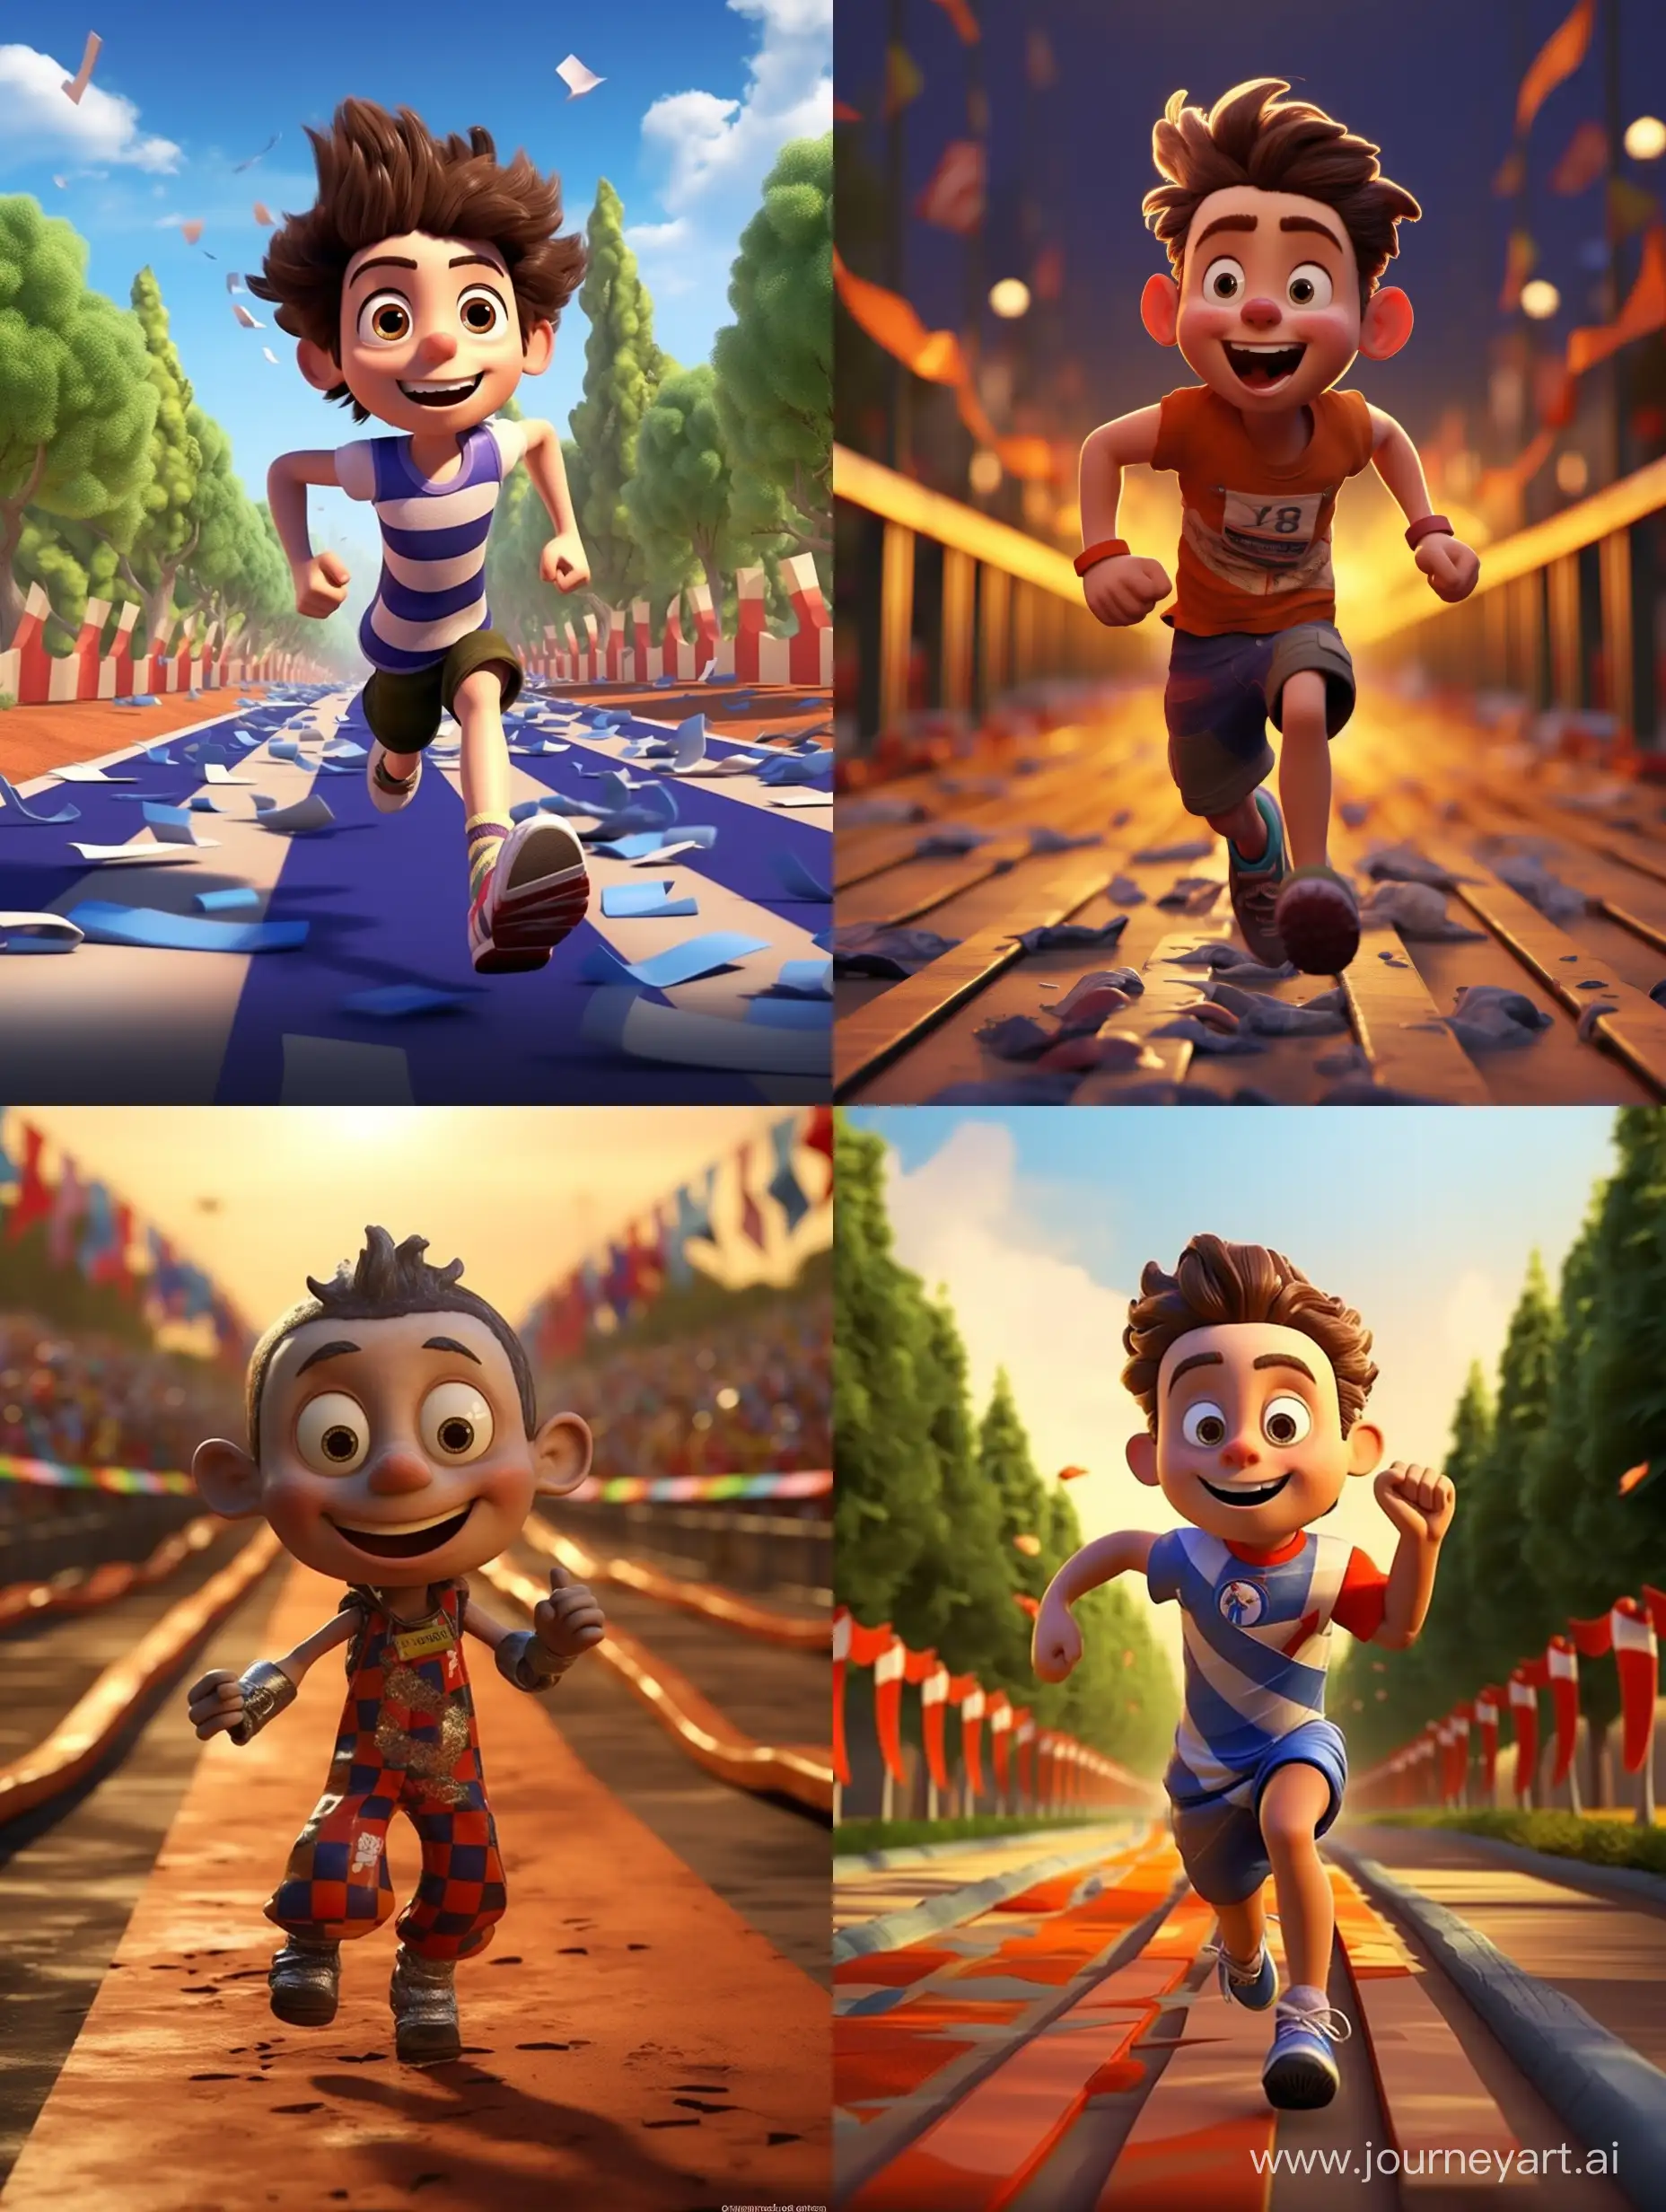 He finally crossed the finish line after five hours of running. pixar style. 3d animation stiye